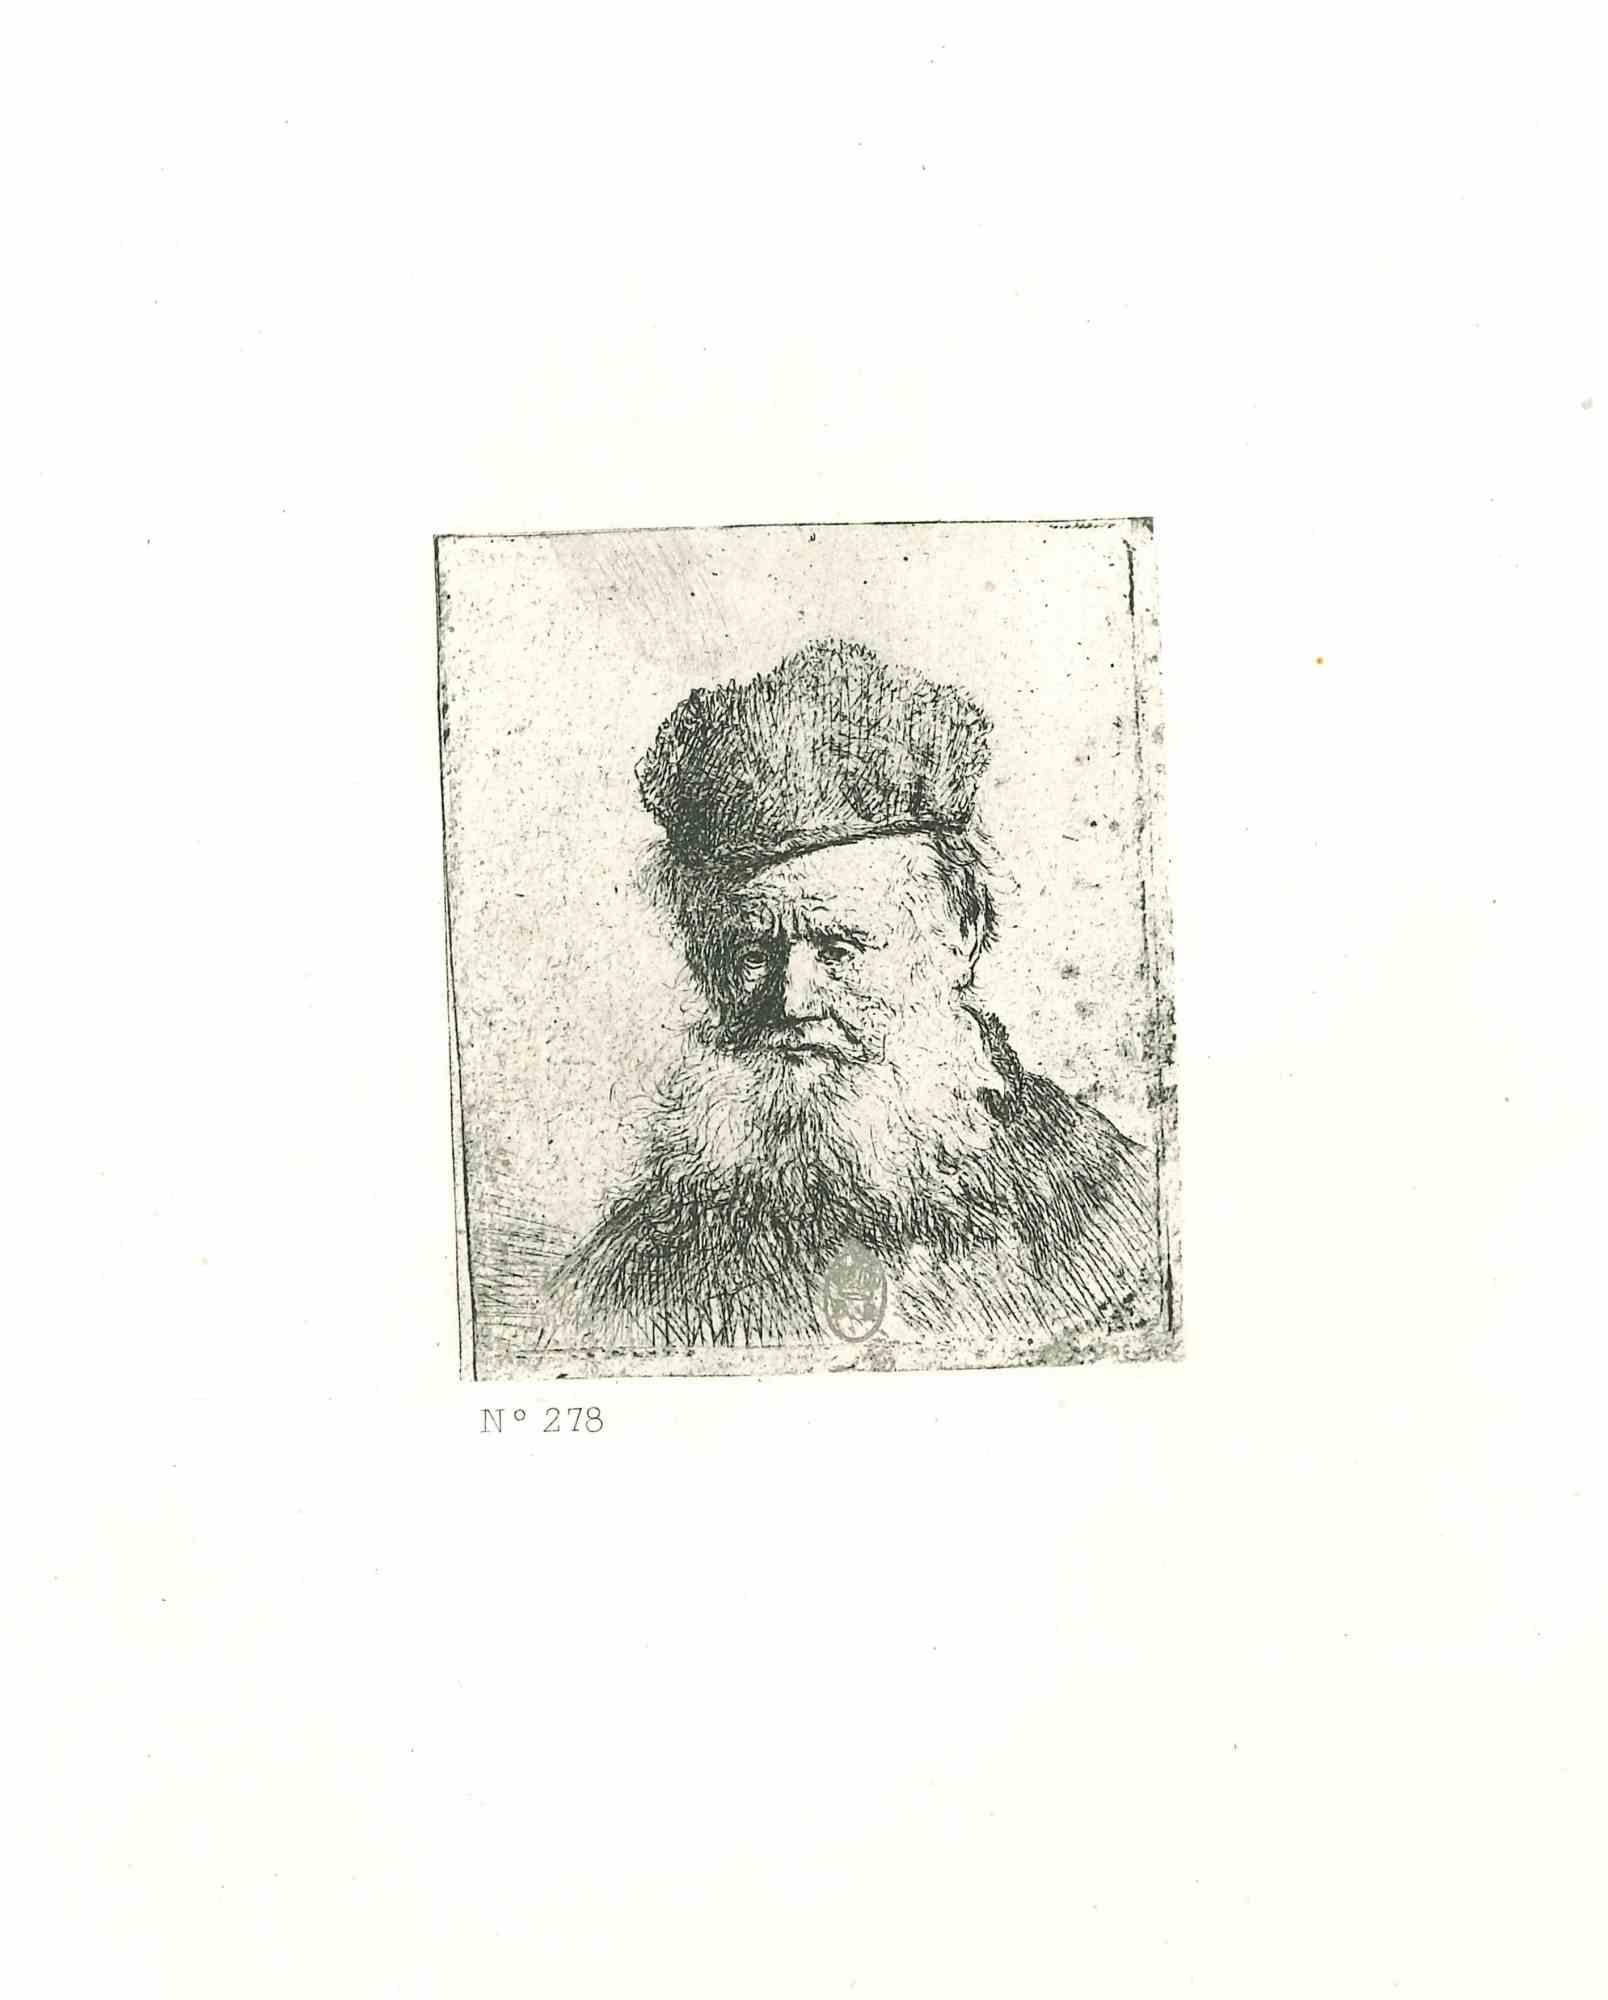 Charles Amand Durand Figurative Print - A Man with a Large Beard - Engraving after Rembrandt - 19th Century